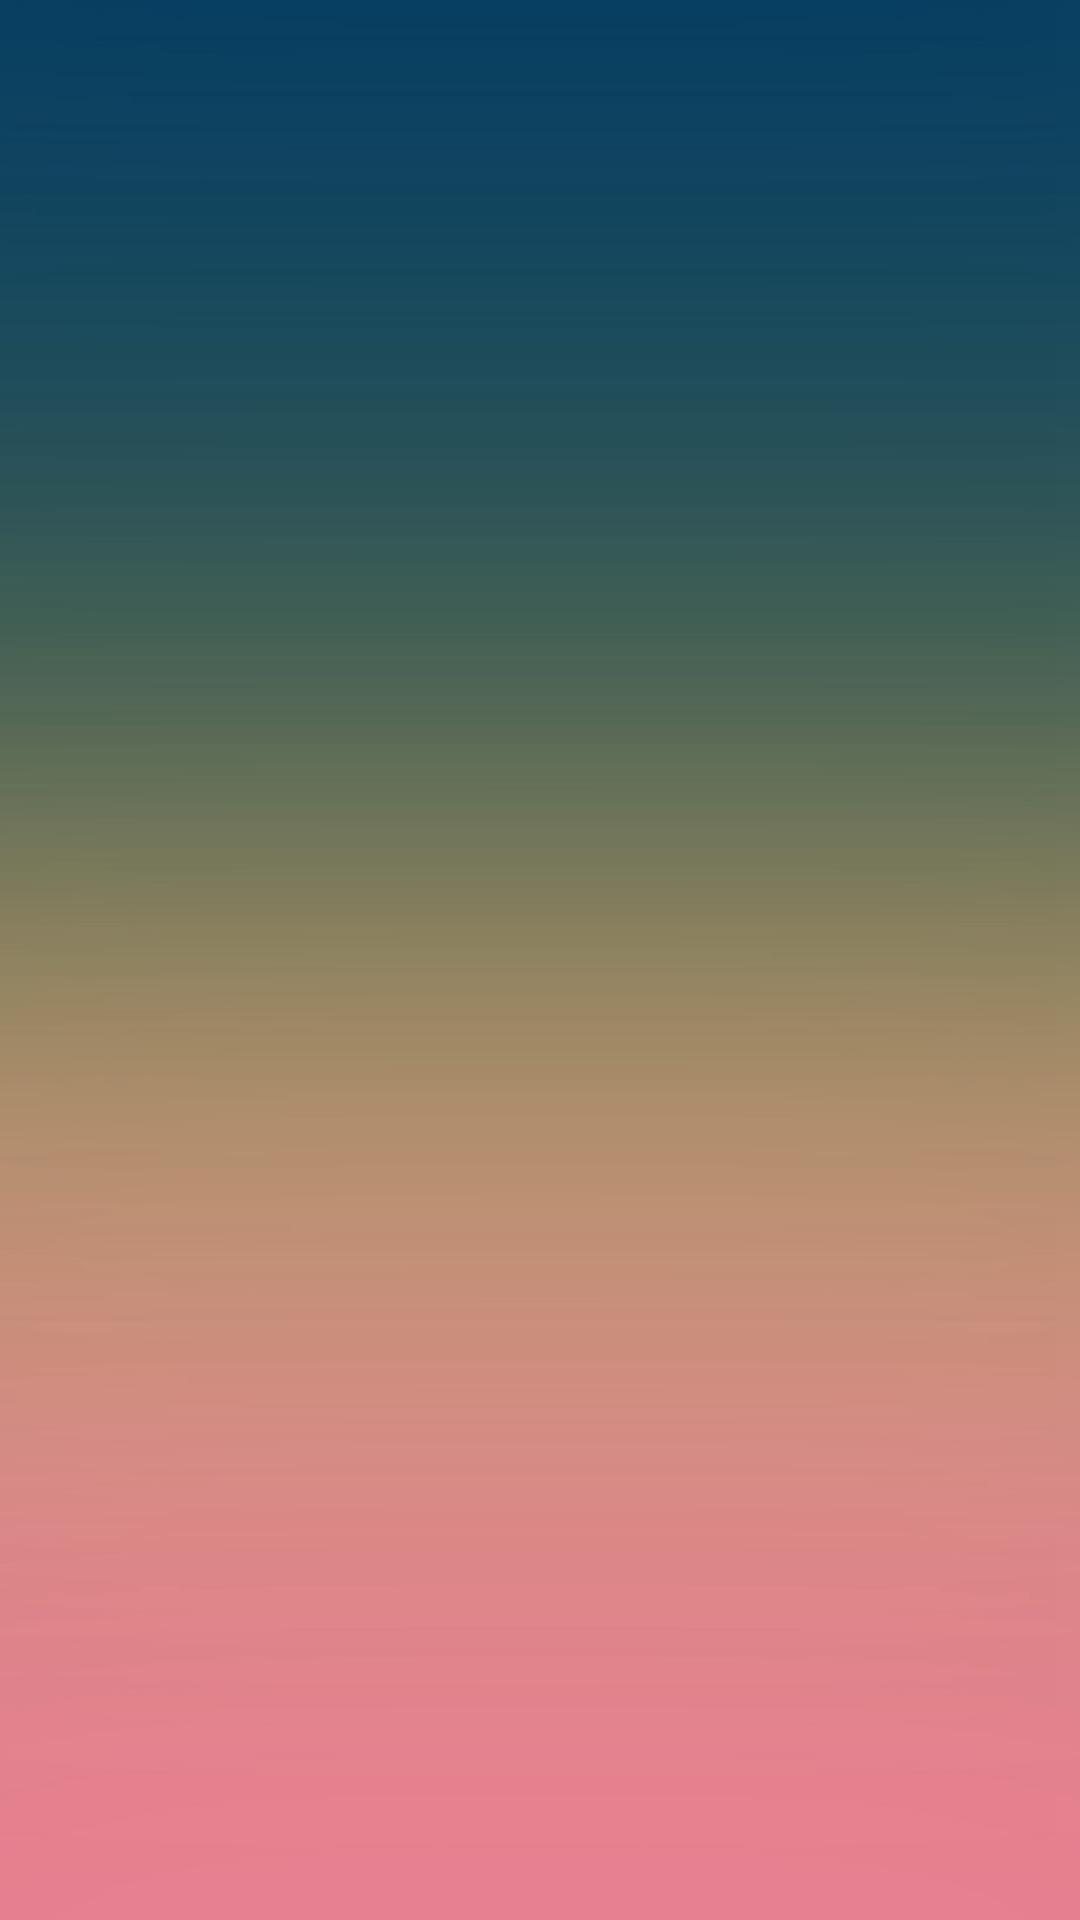 Ugly People Color Gradation Blur iPhone 8 Wallpaper Free Download